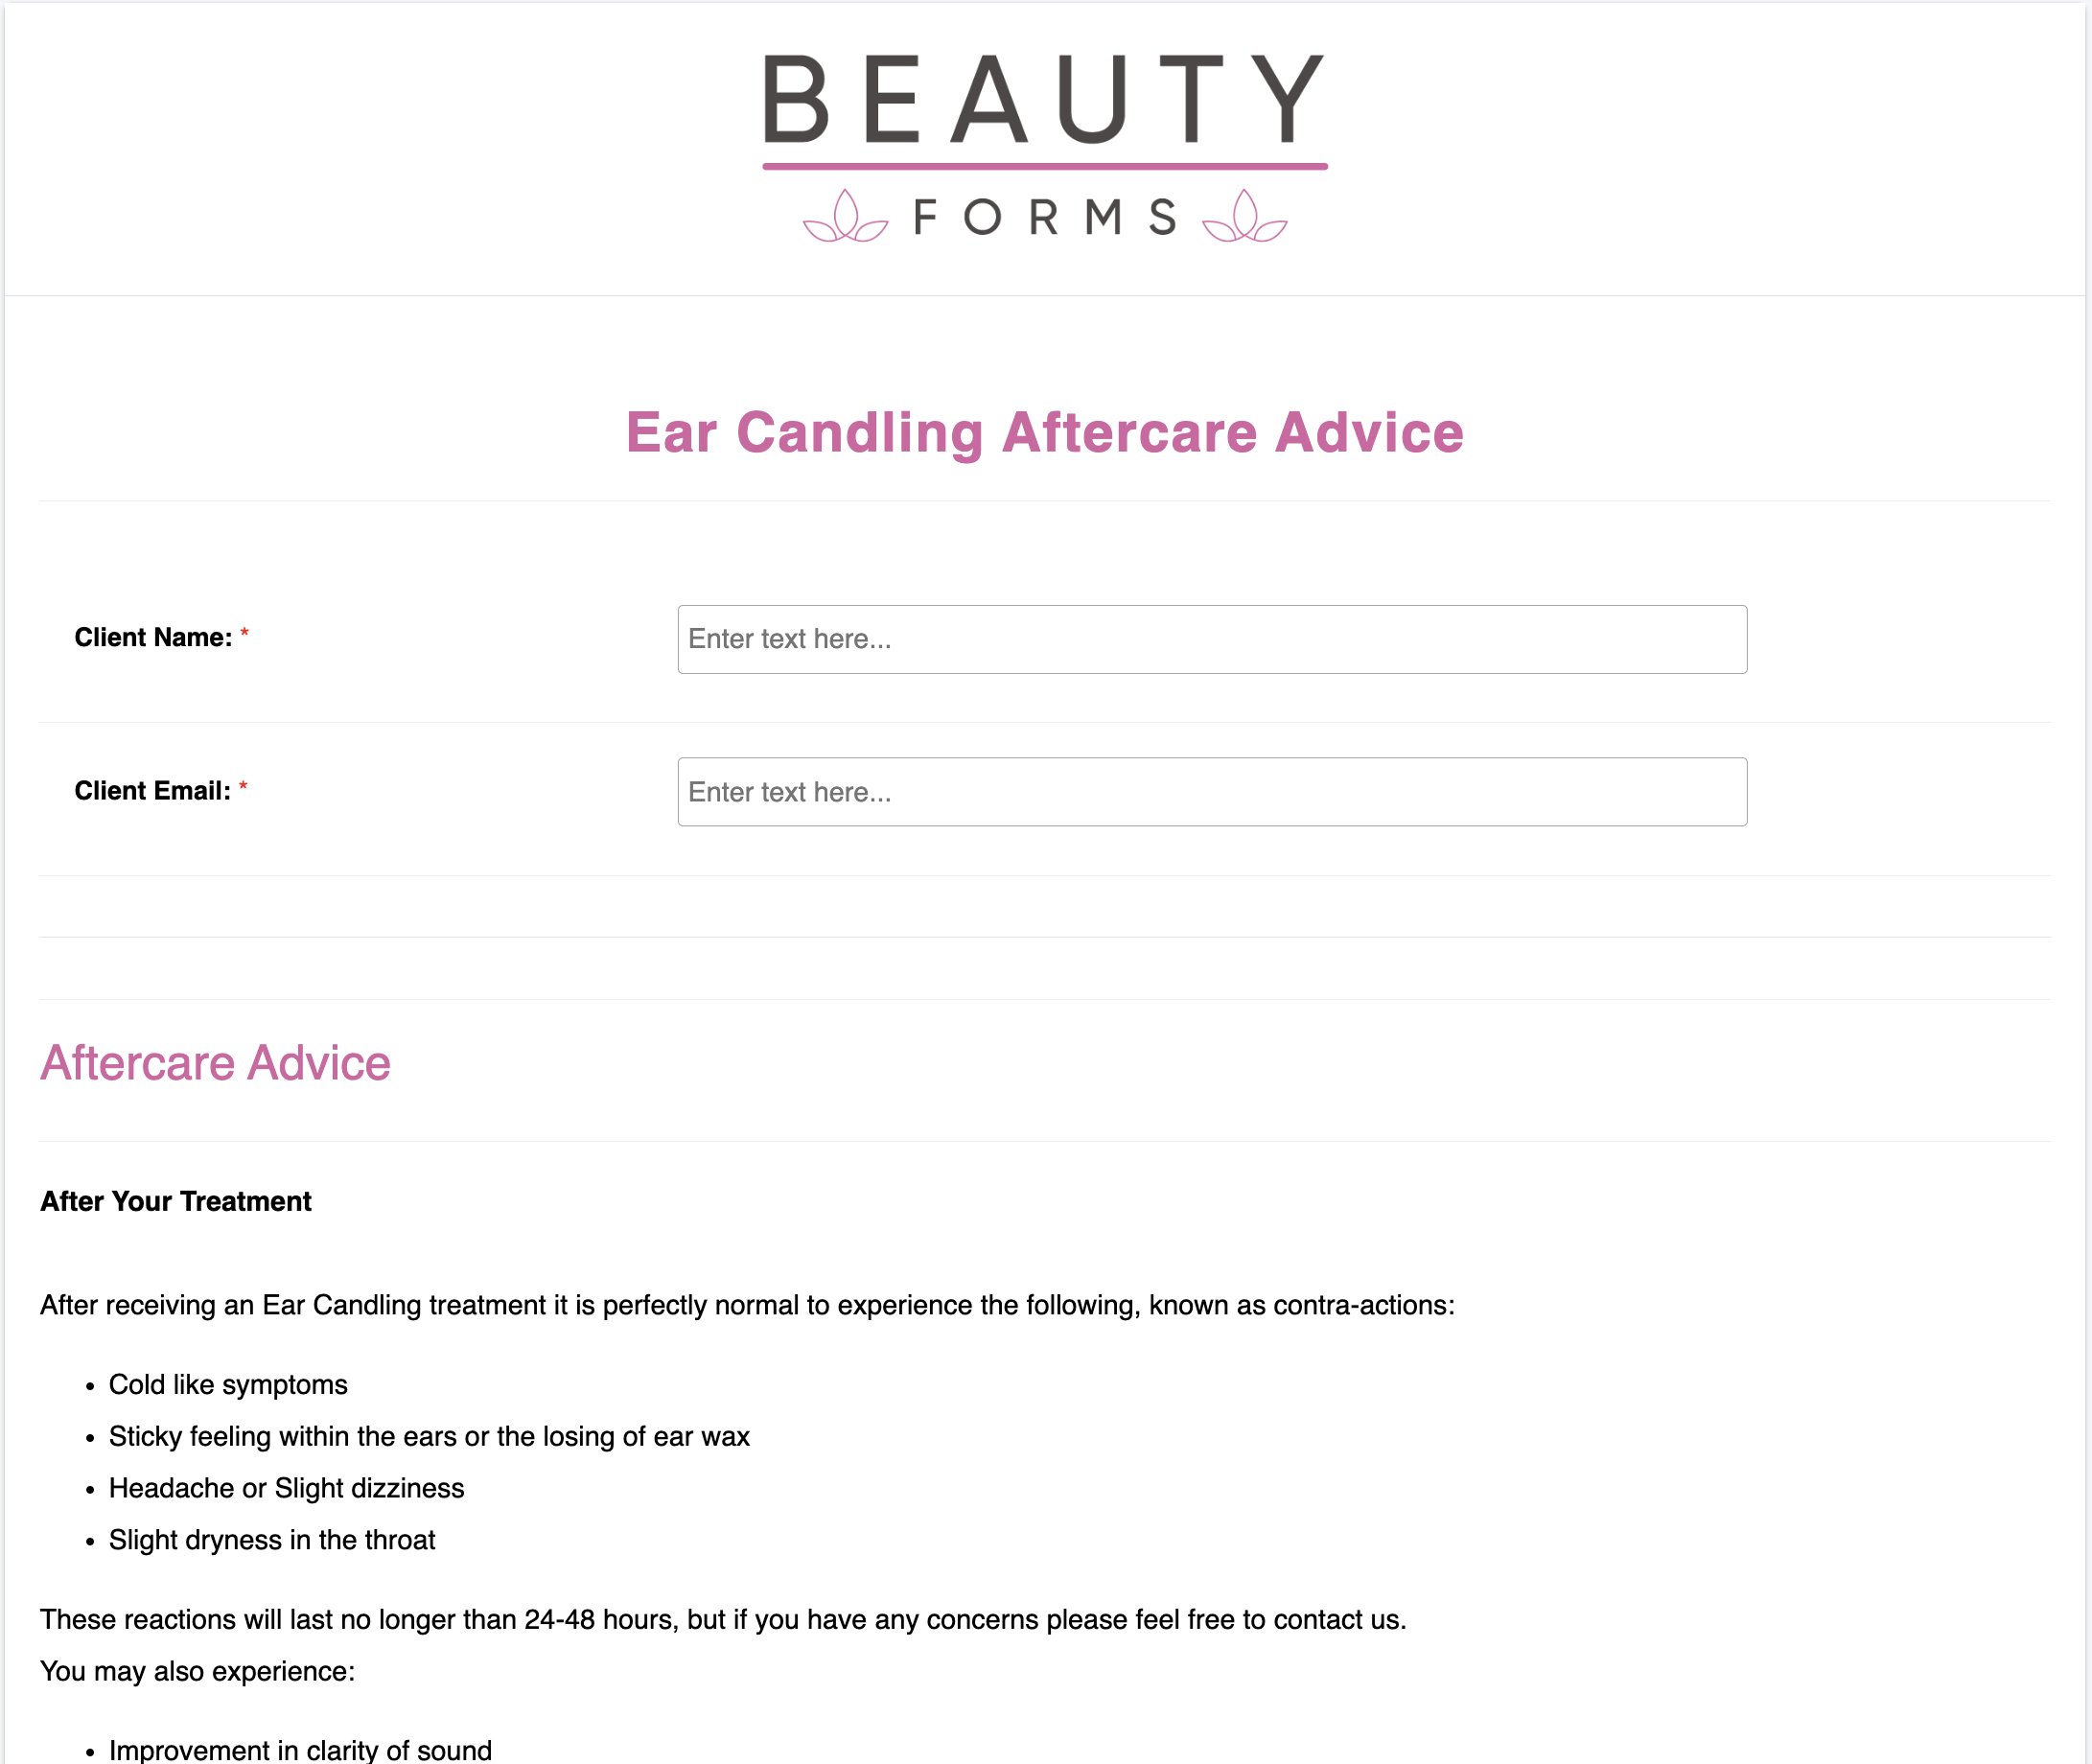 Ear Candling Aftercare Form